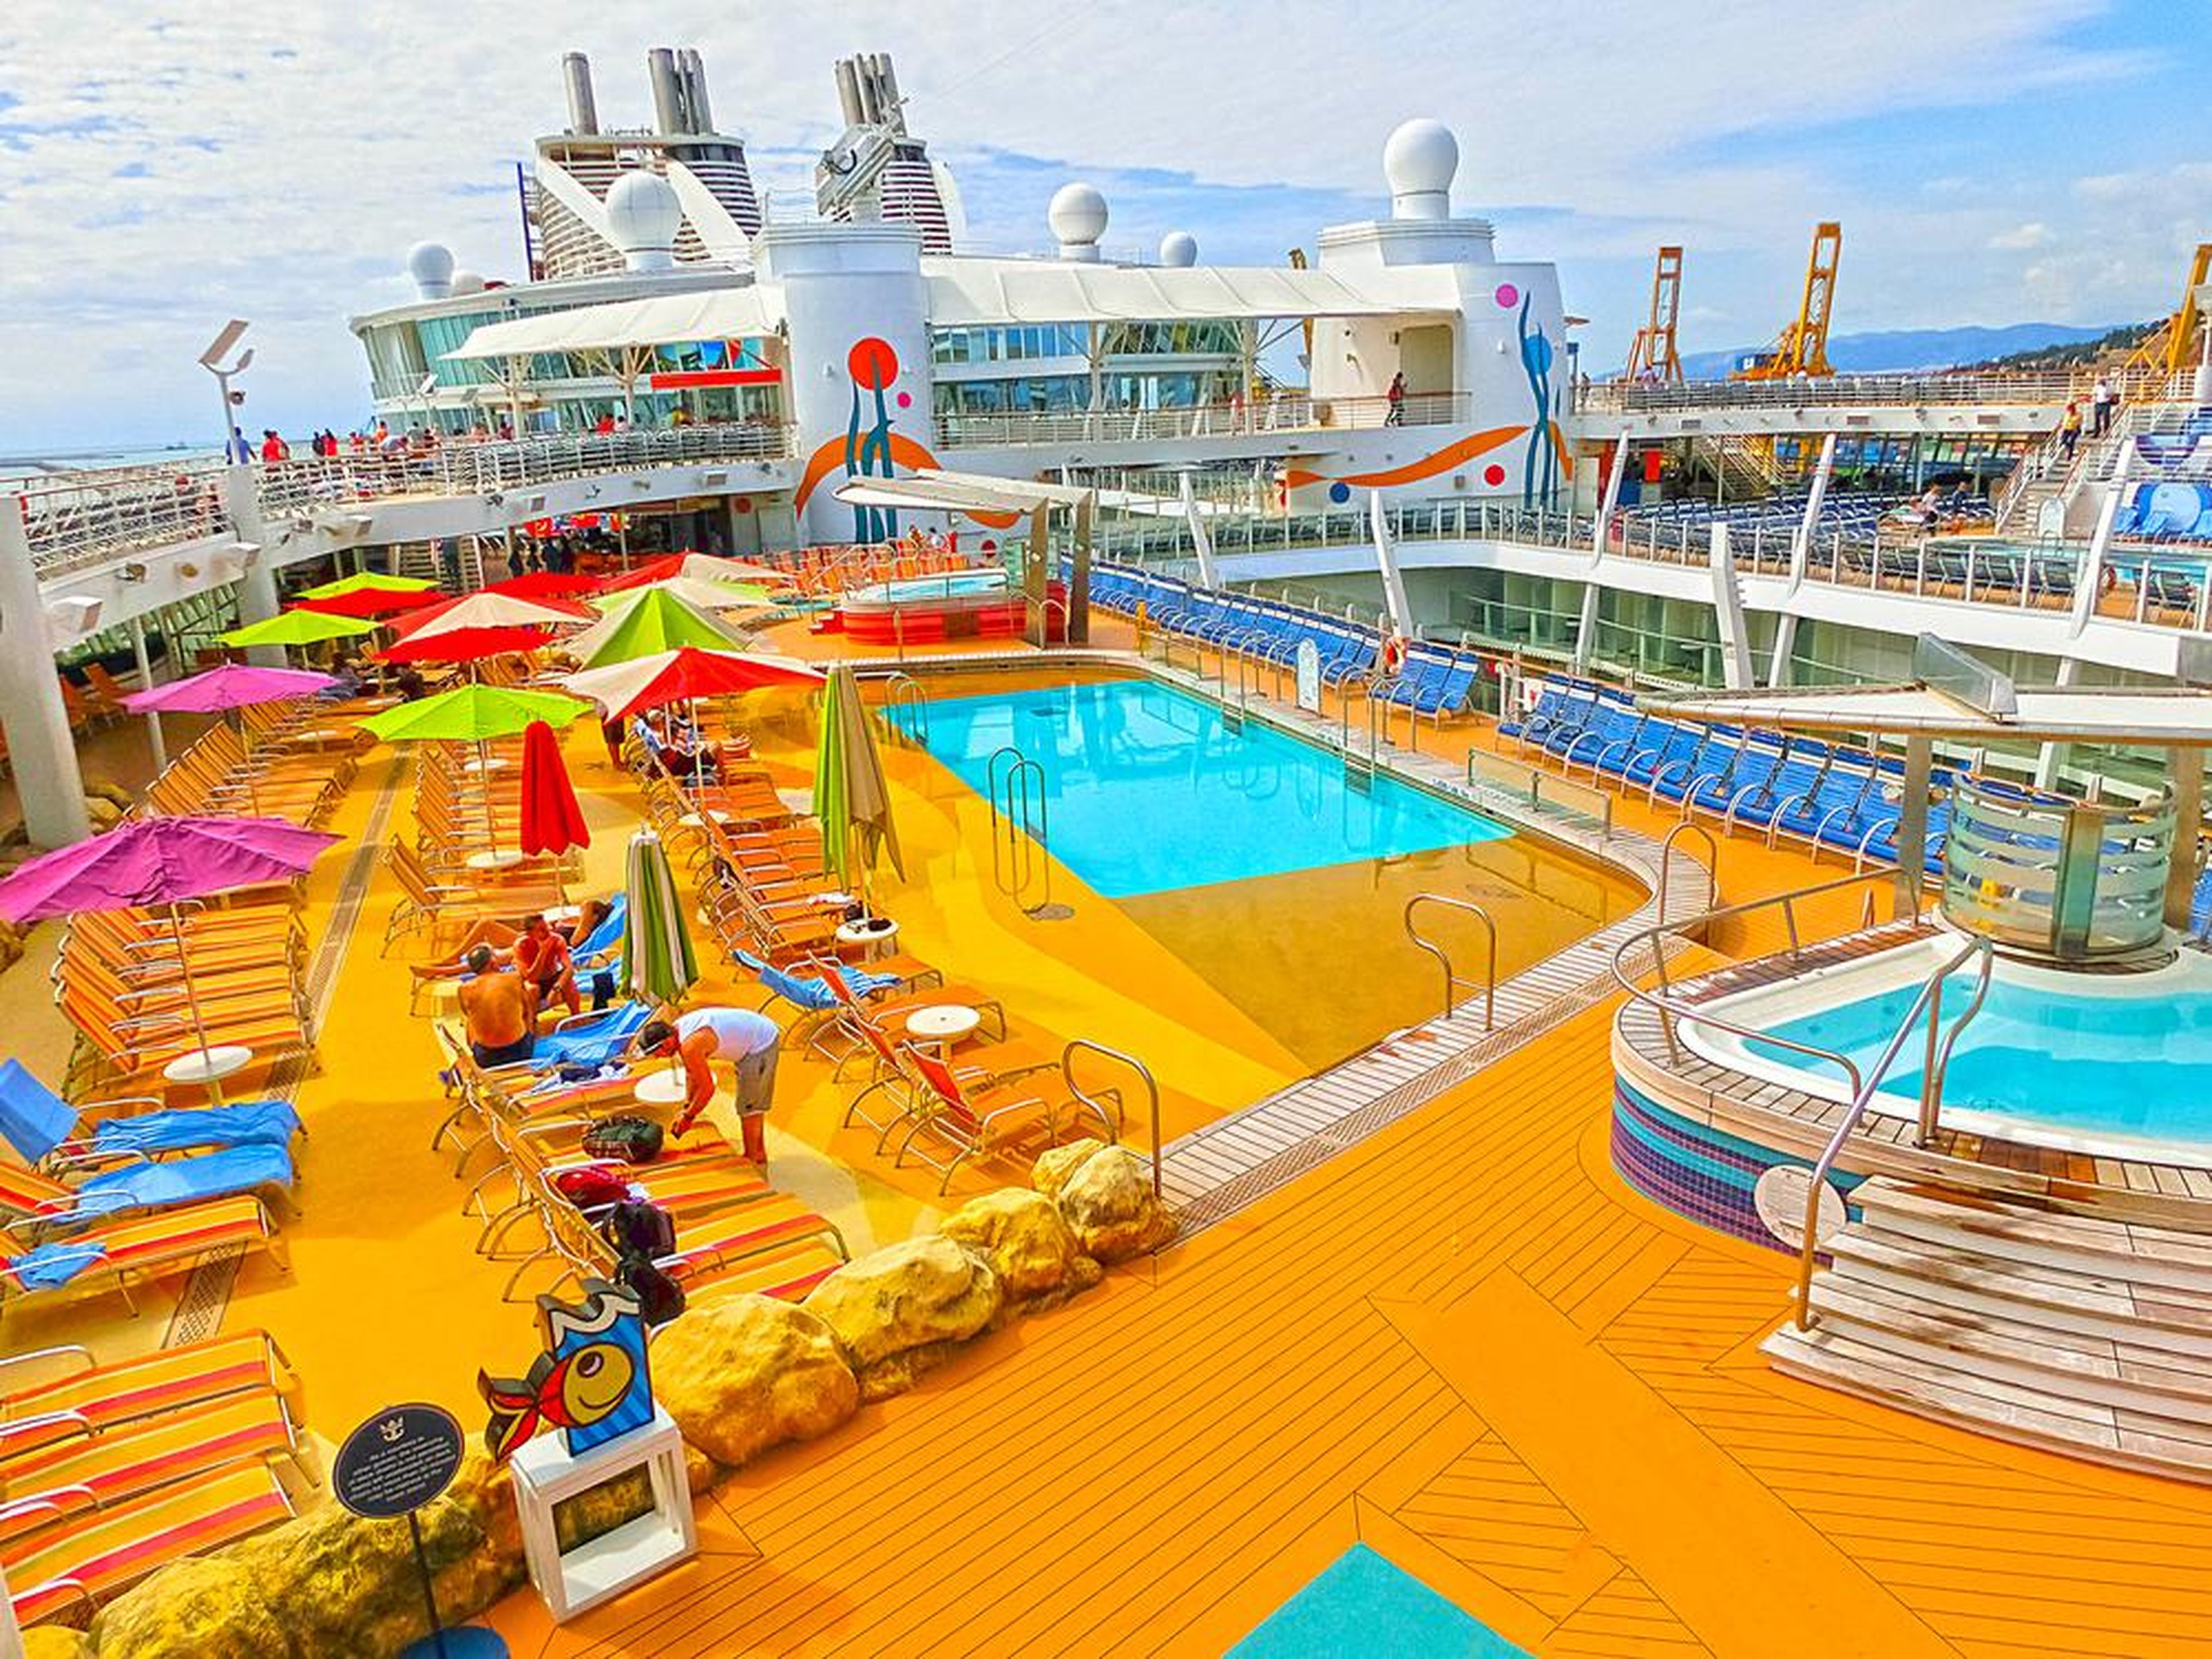 The pool deck of a cruise ship can be the perfect place to relax and work on your tan.